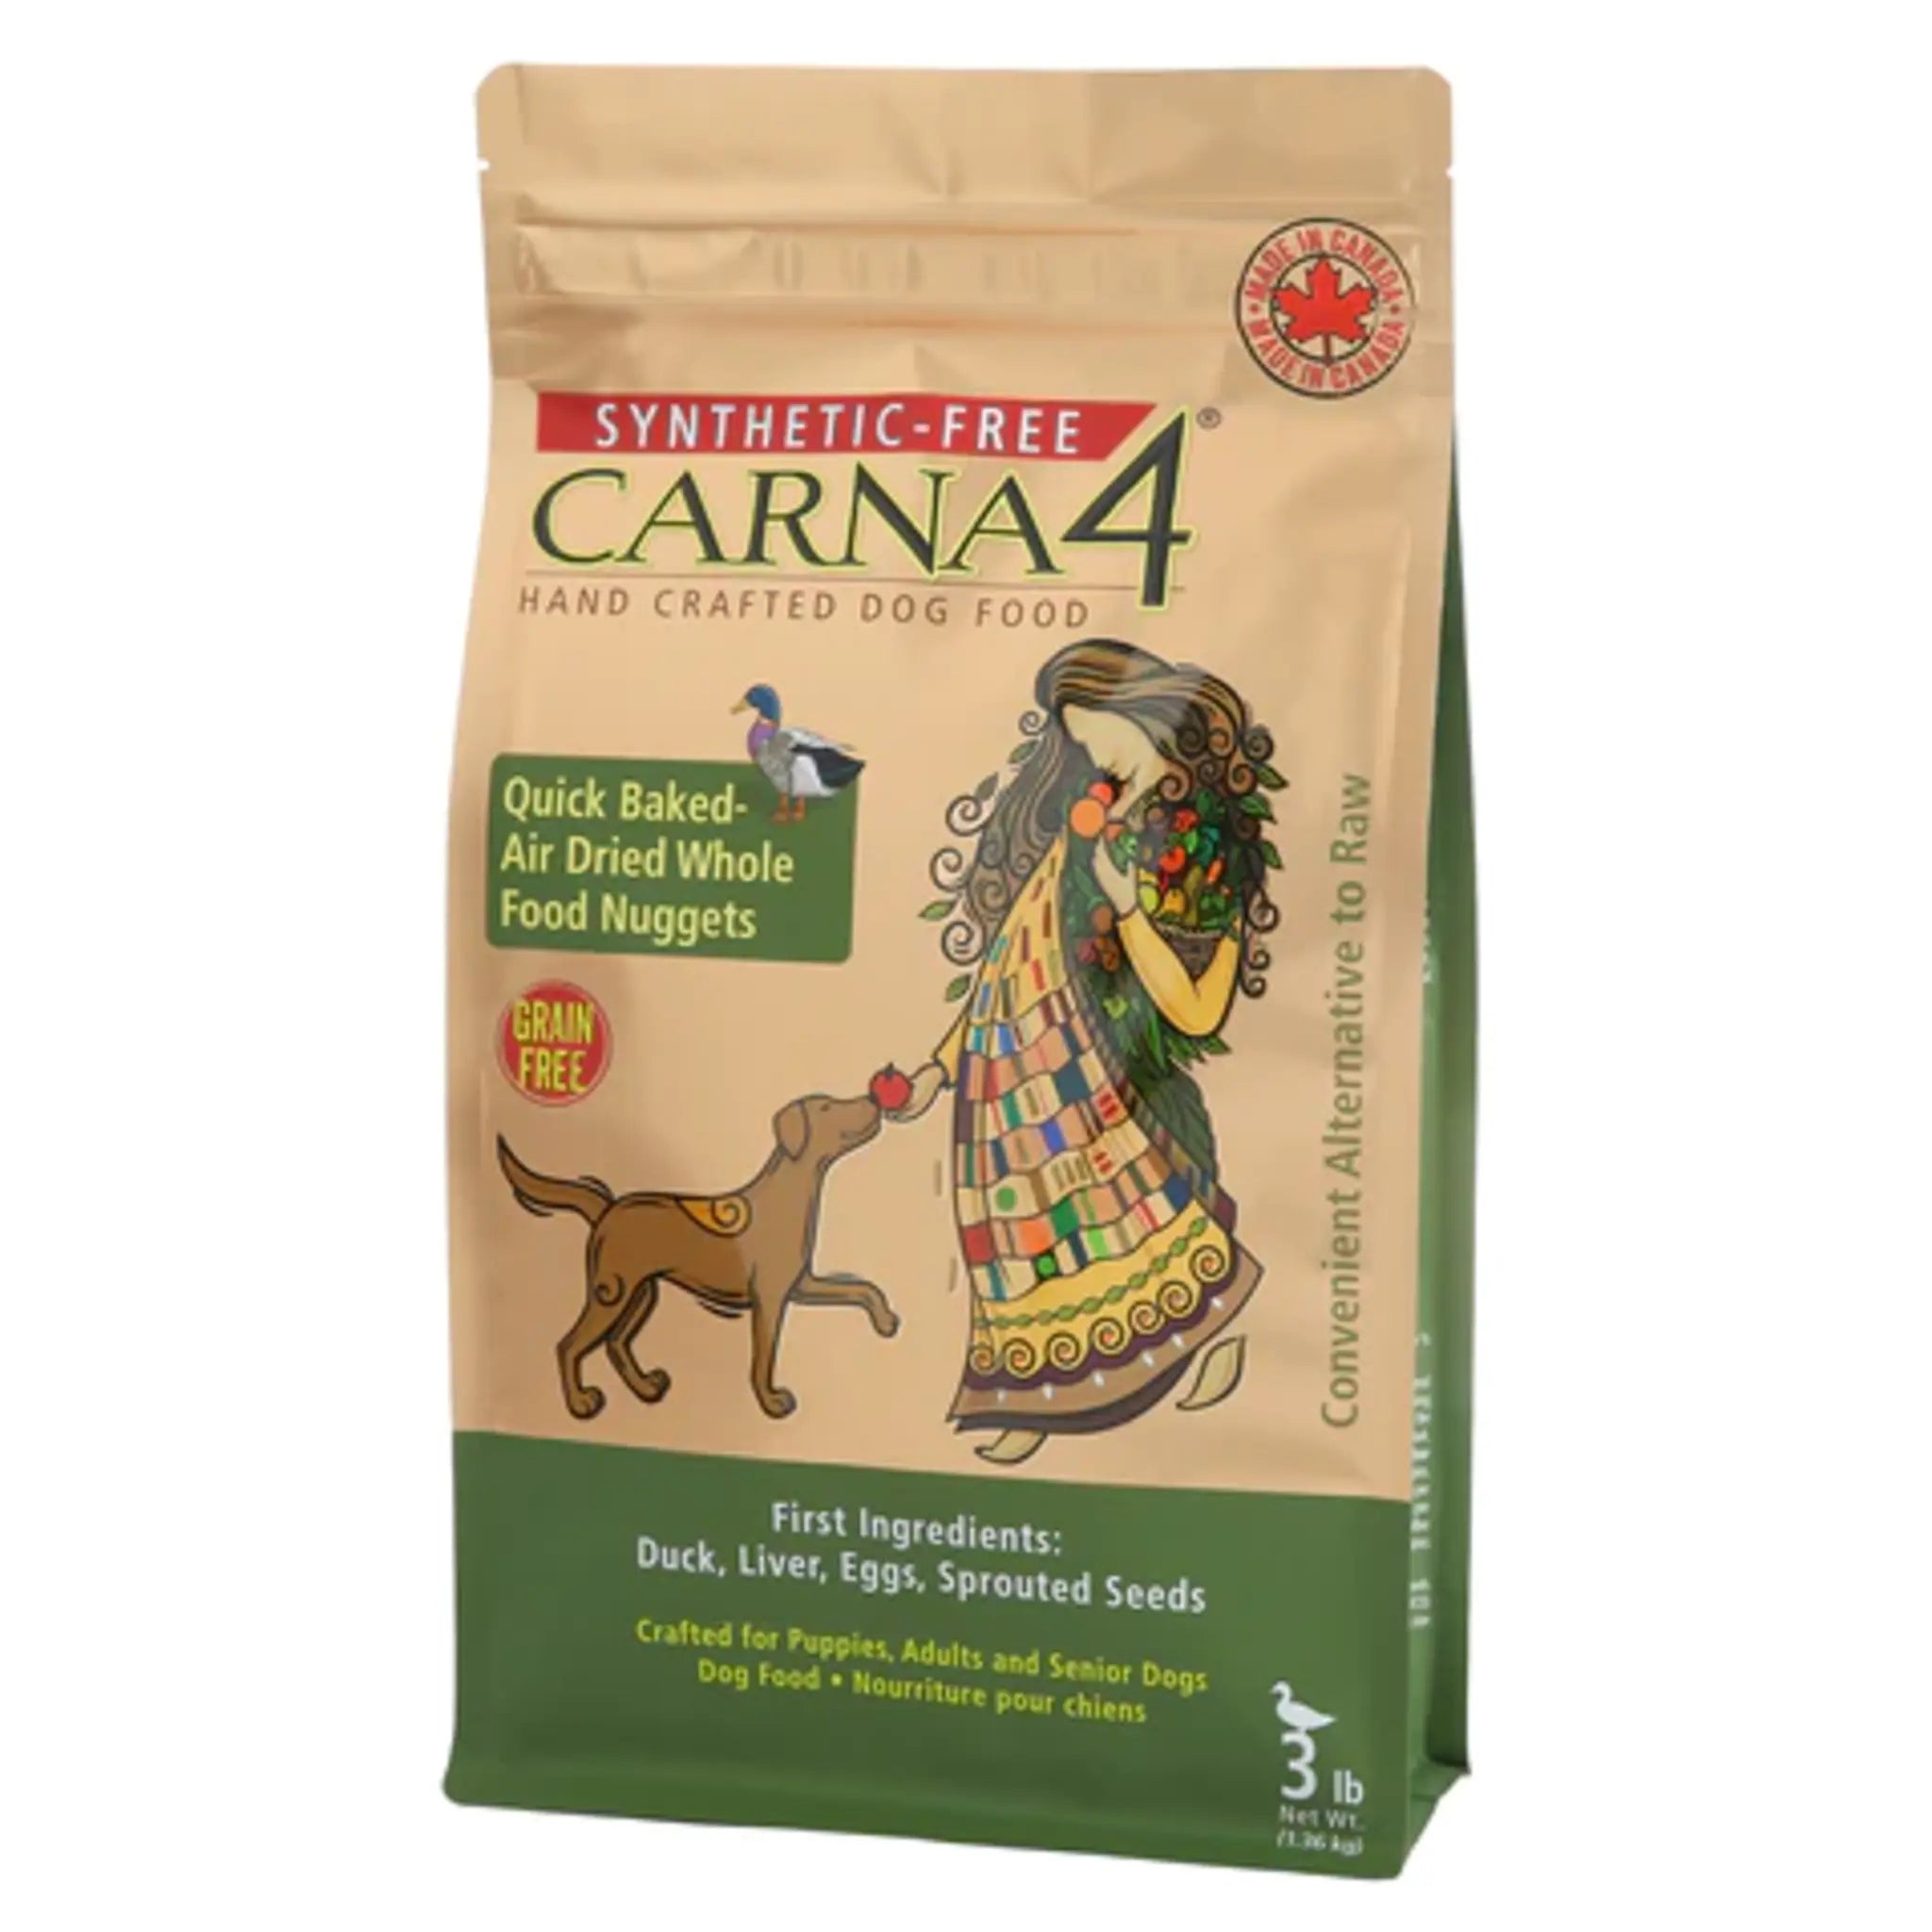 A bag of Carna4 Hand Crafted Dog Food, Duck Recipe, Made in Canada, Synthetic-Free, 3 lb.